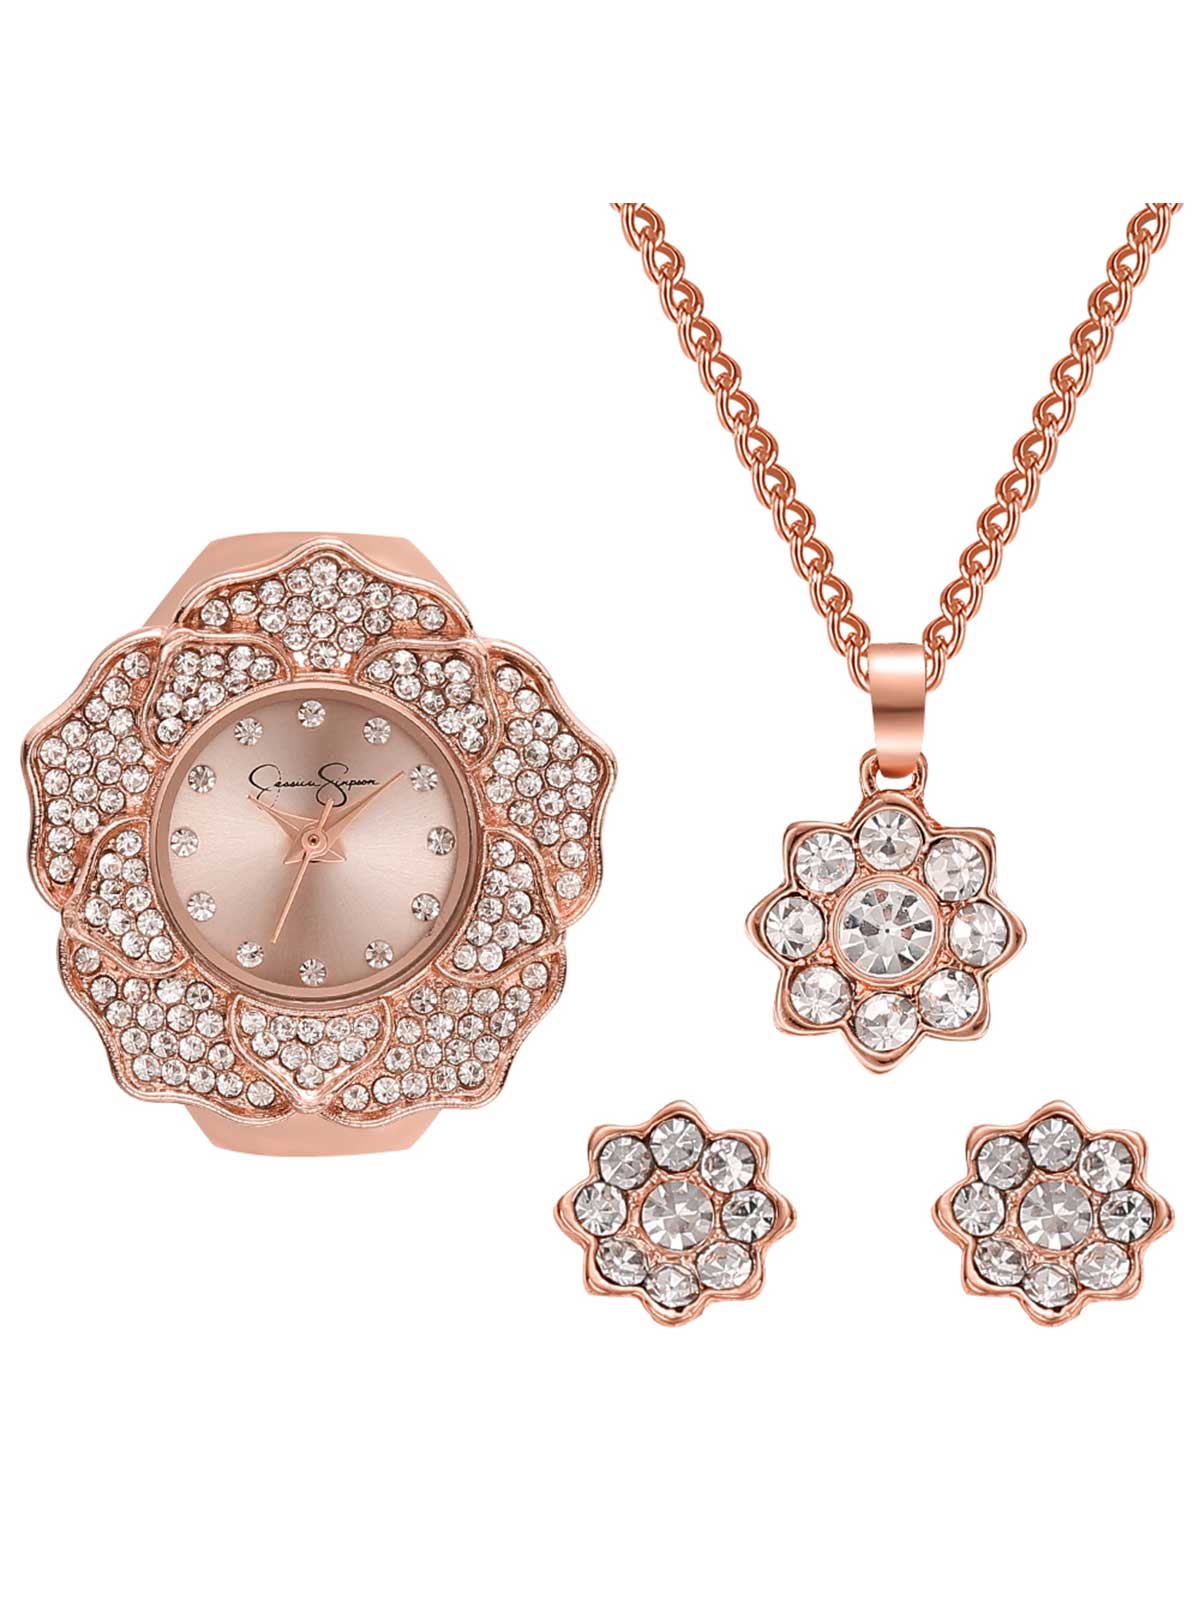 Shop Gold Pendant and Earring Sets | Gold Palace